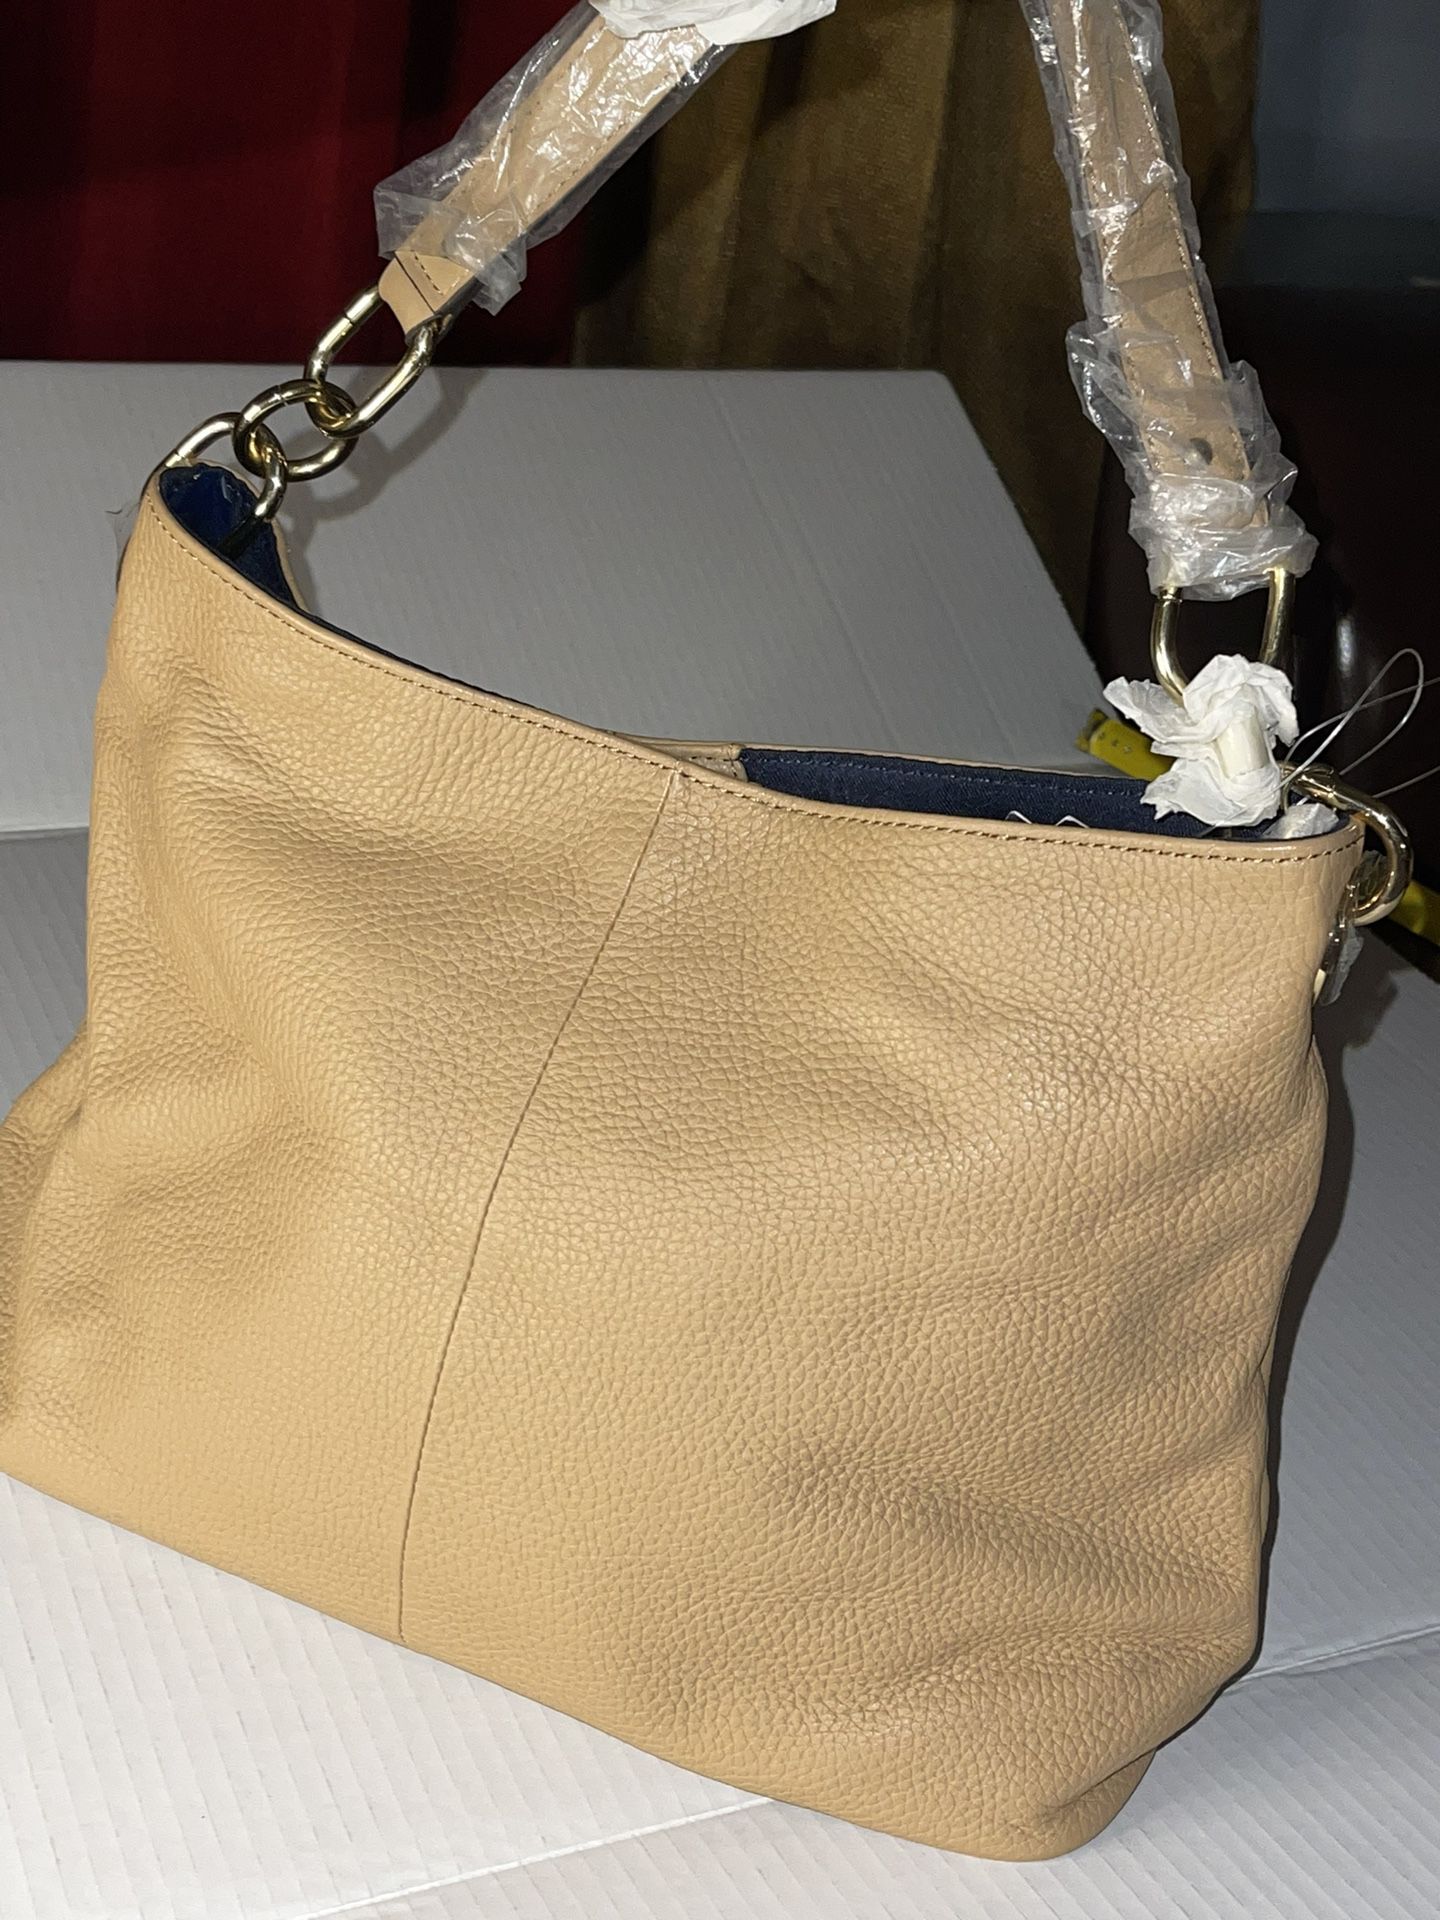 TOMMY HILFIGER Women’s Leather Bag,color beige,detailed with gold hardware.